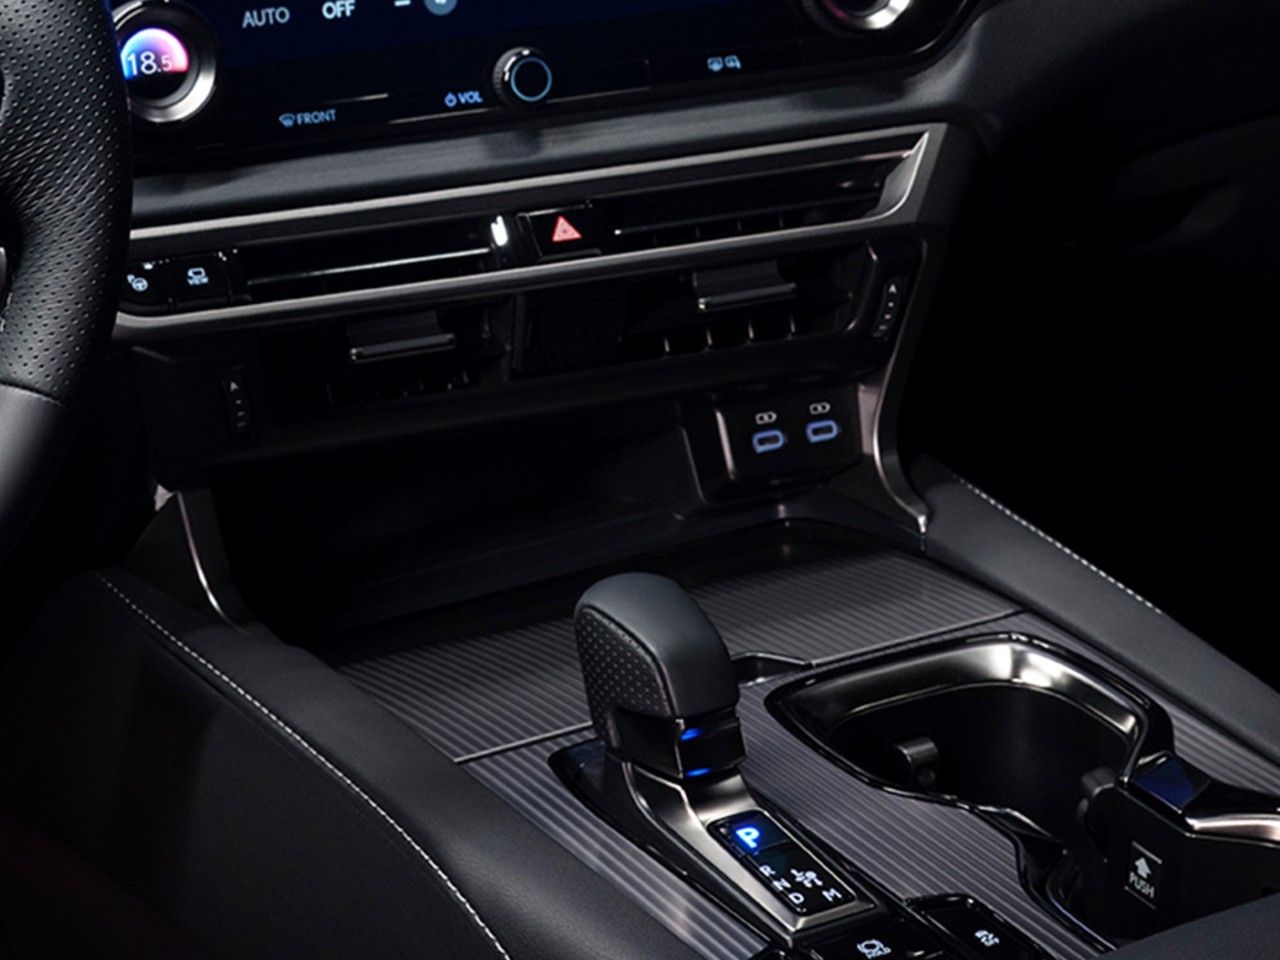 Lexus RX's wireless charging tray and center console